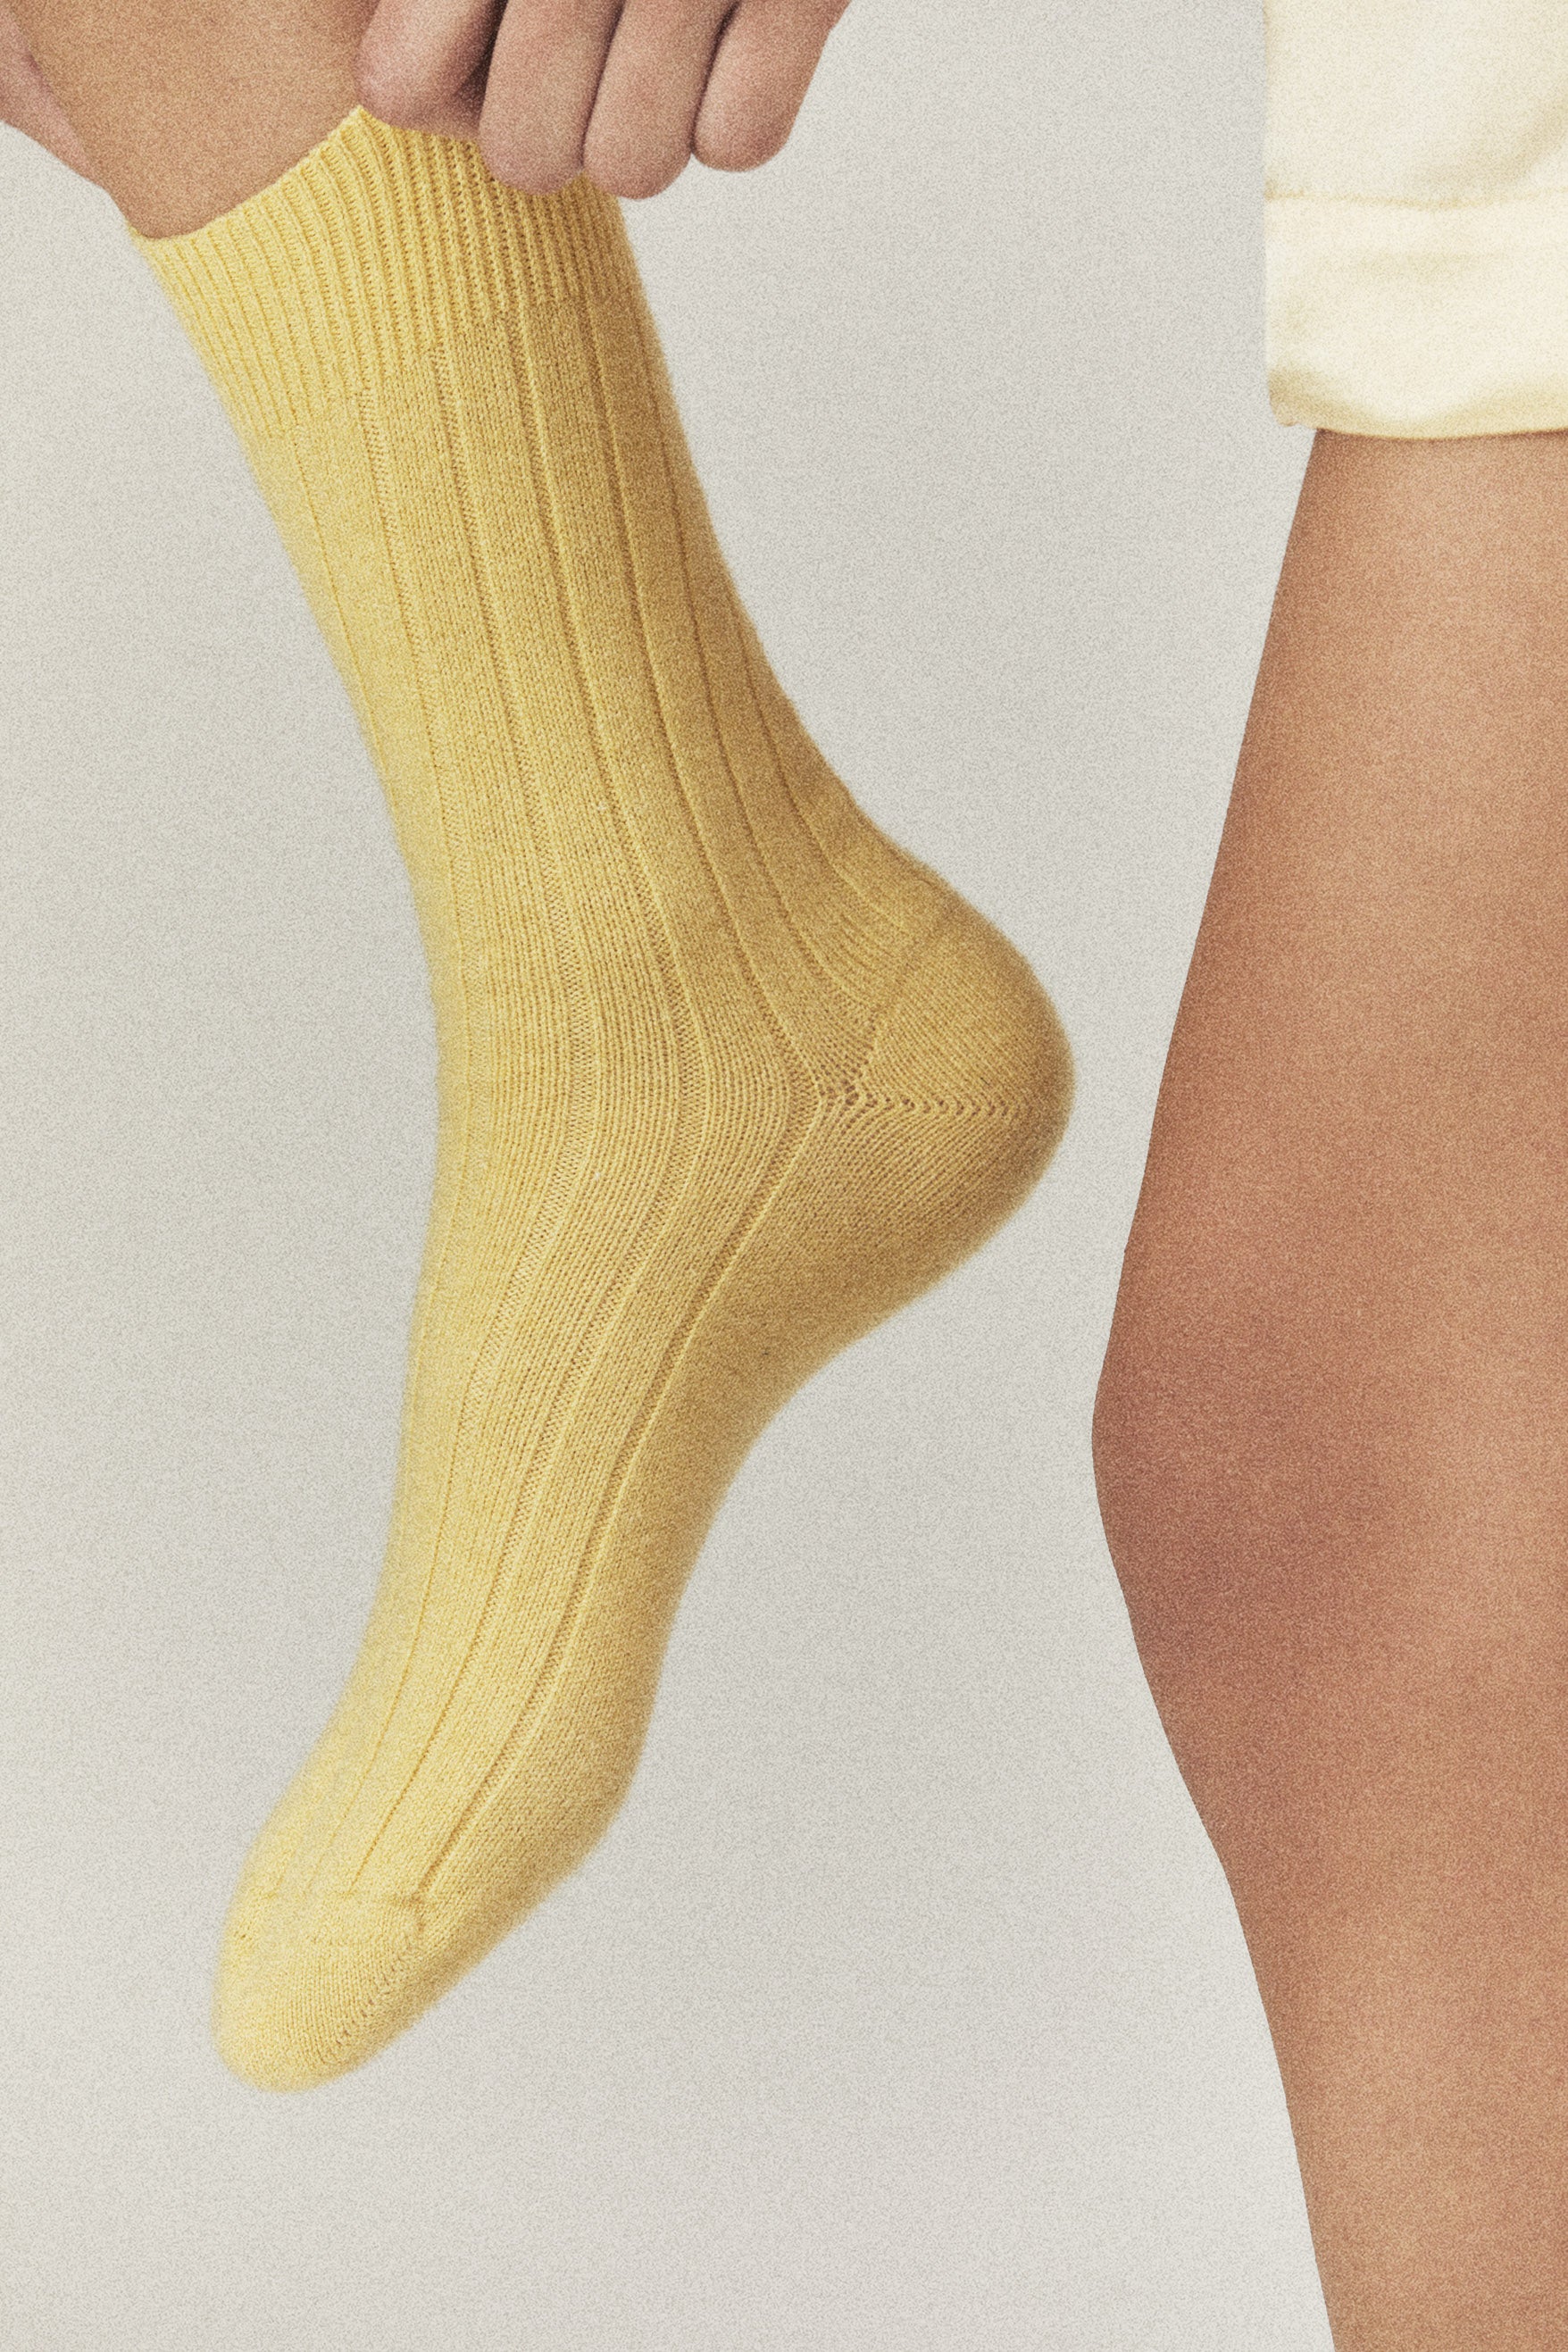 The Danielle Sock, Mongolian Cashmere, Butter being pulled up